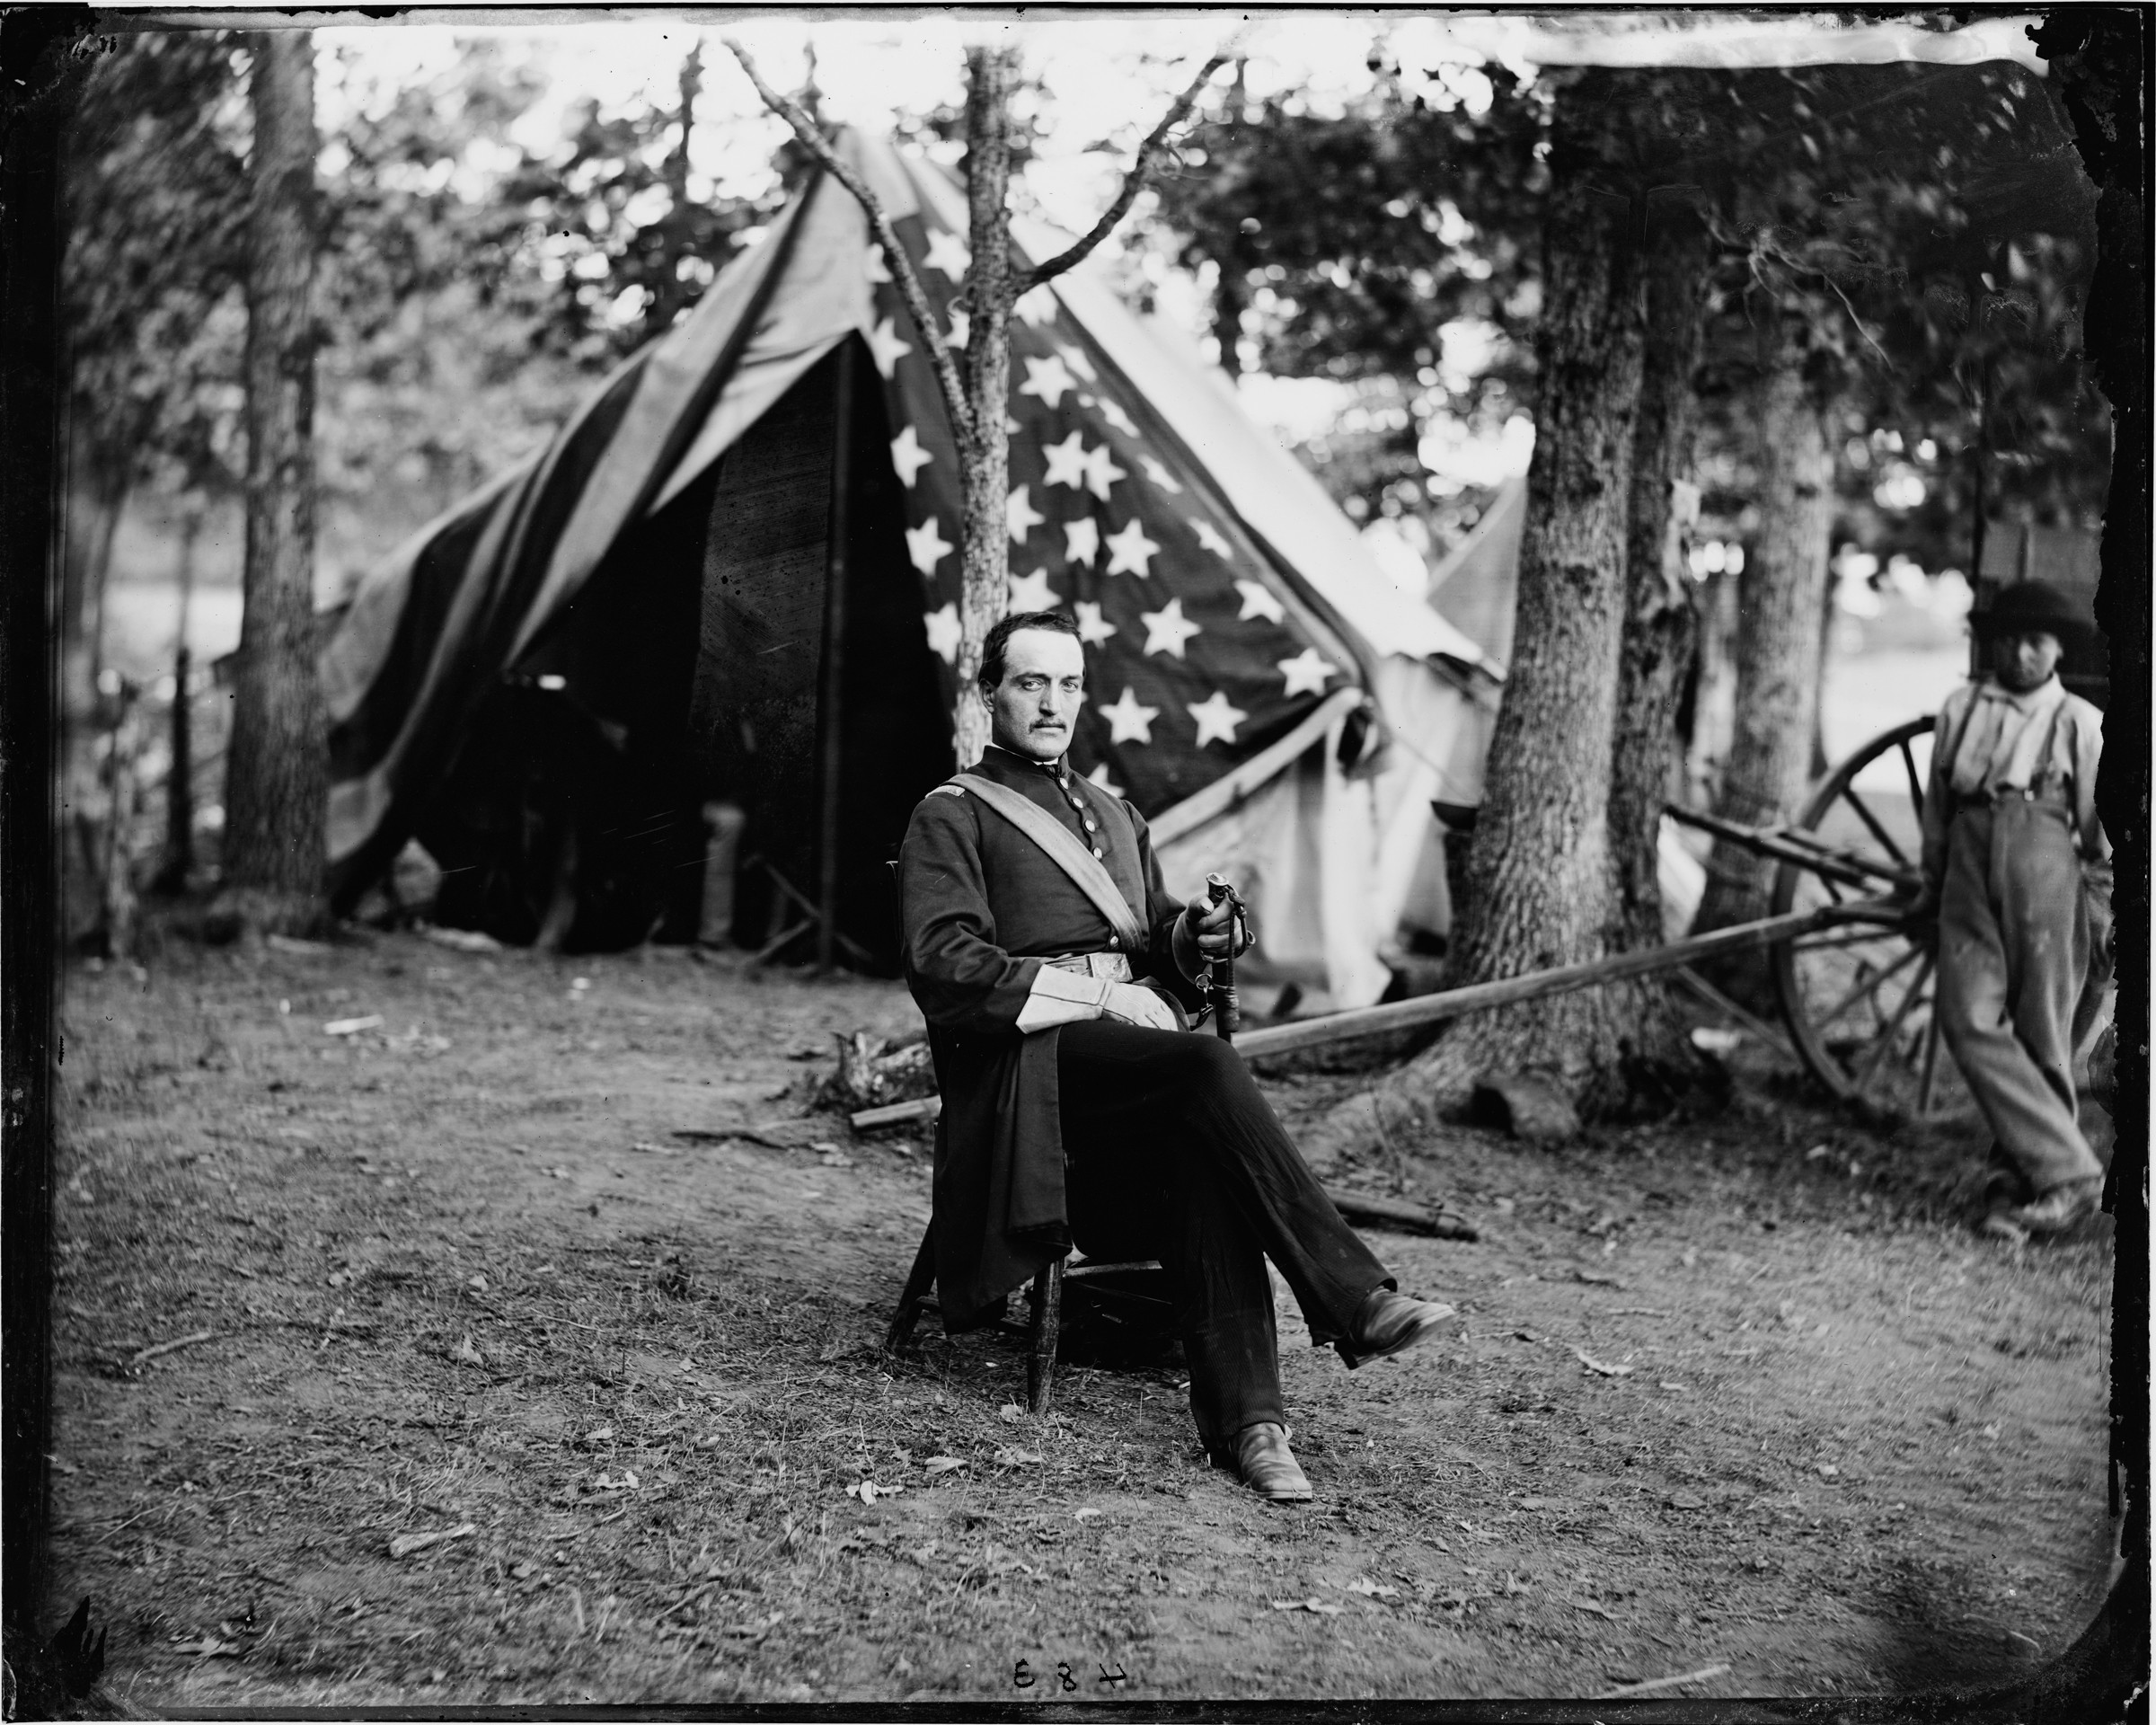 Photography as history in the american civil war